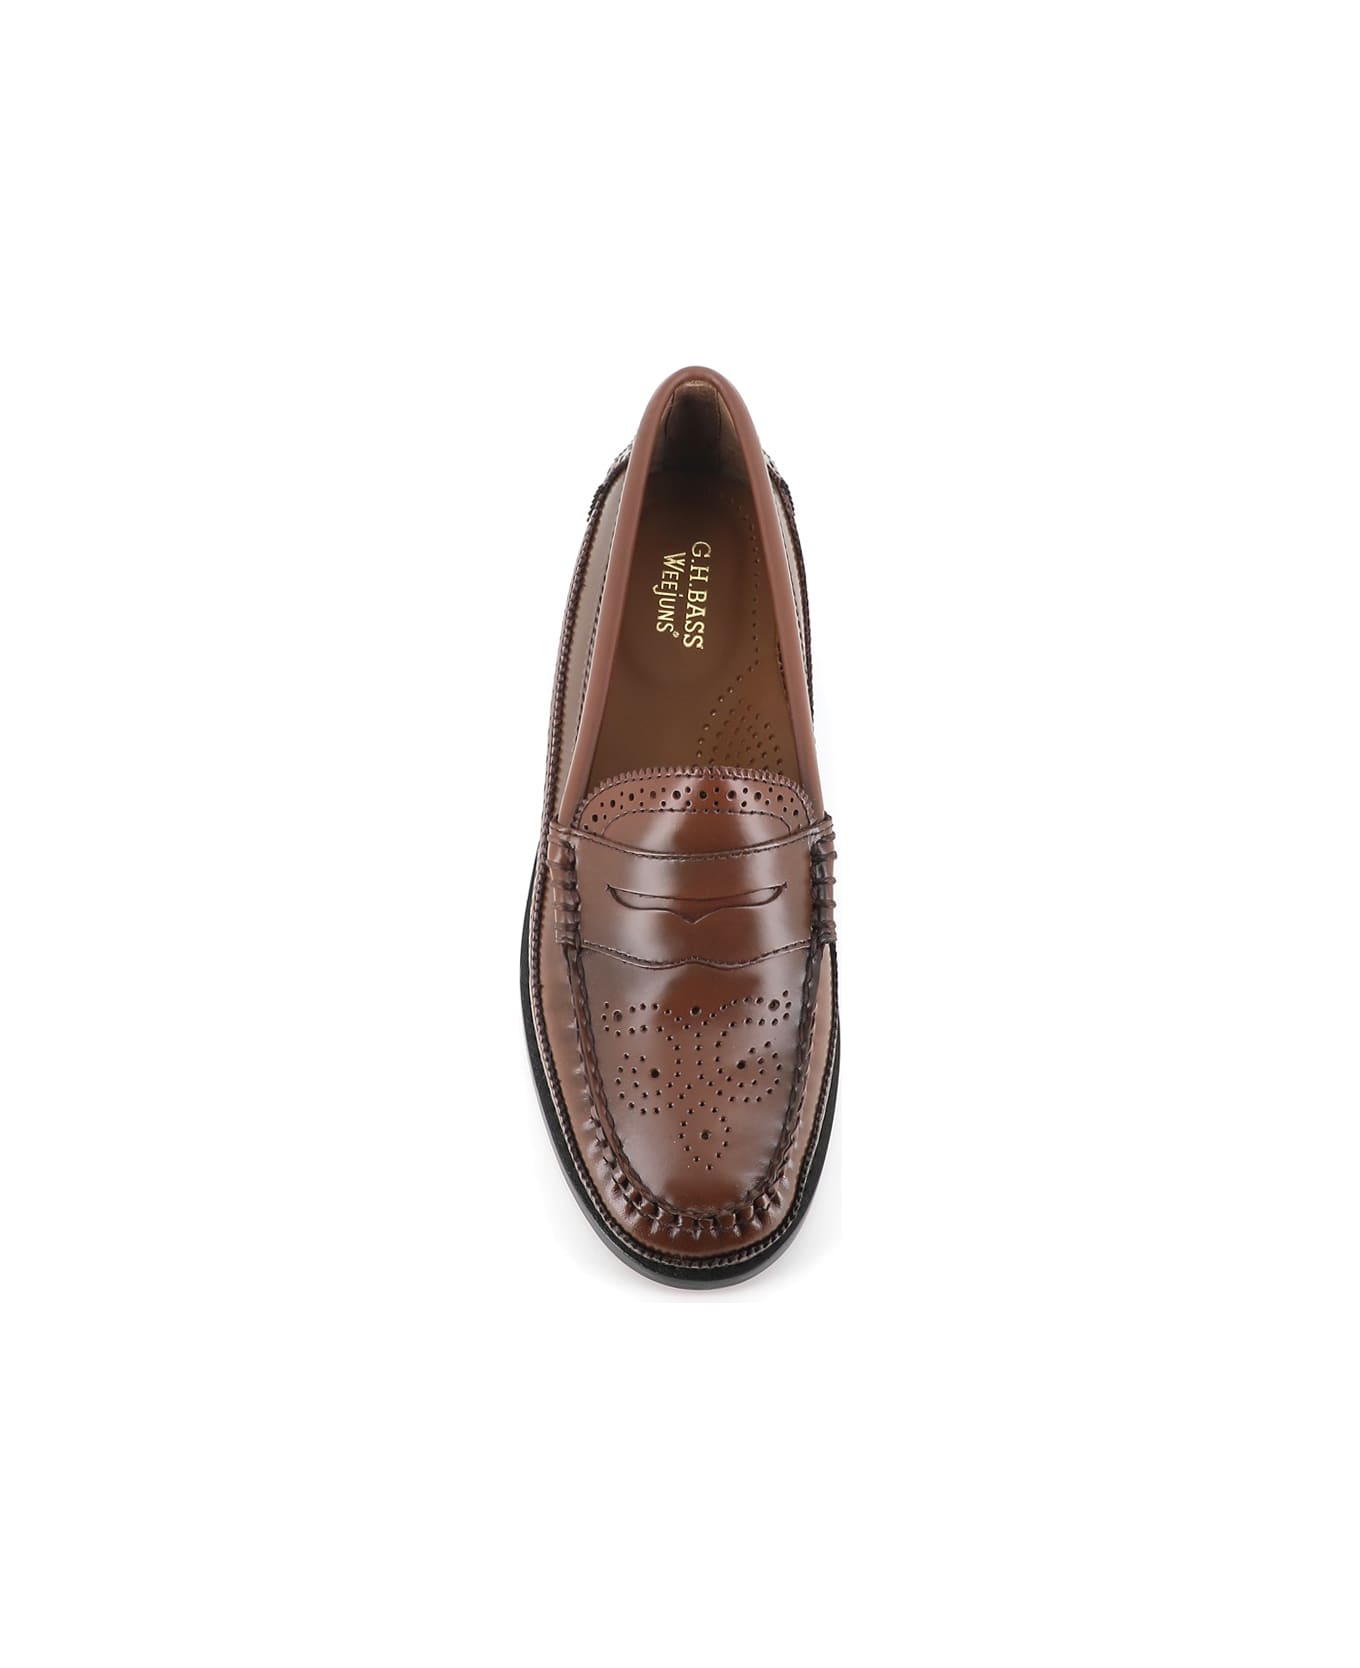 G.H.Bass & Co. Penny Brogues Loafer - Cognac